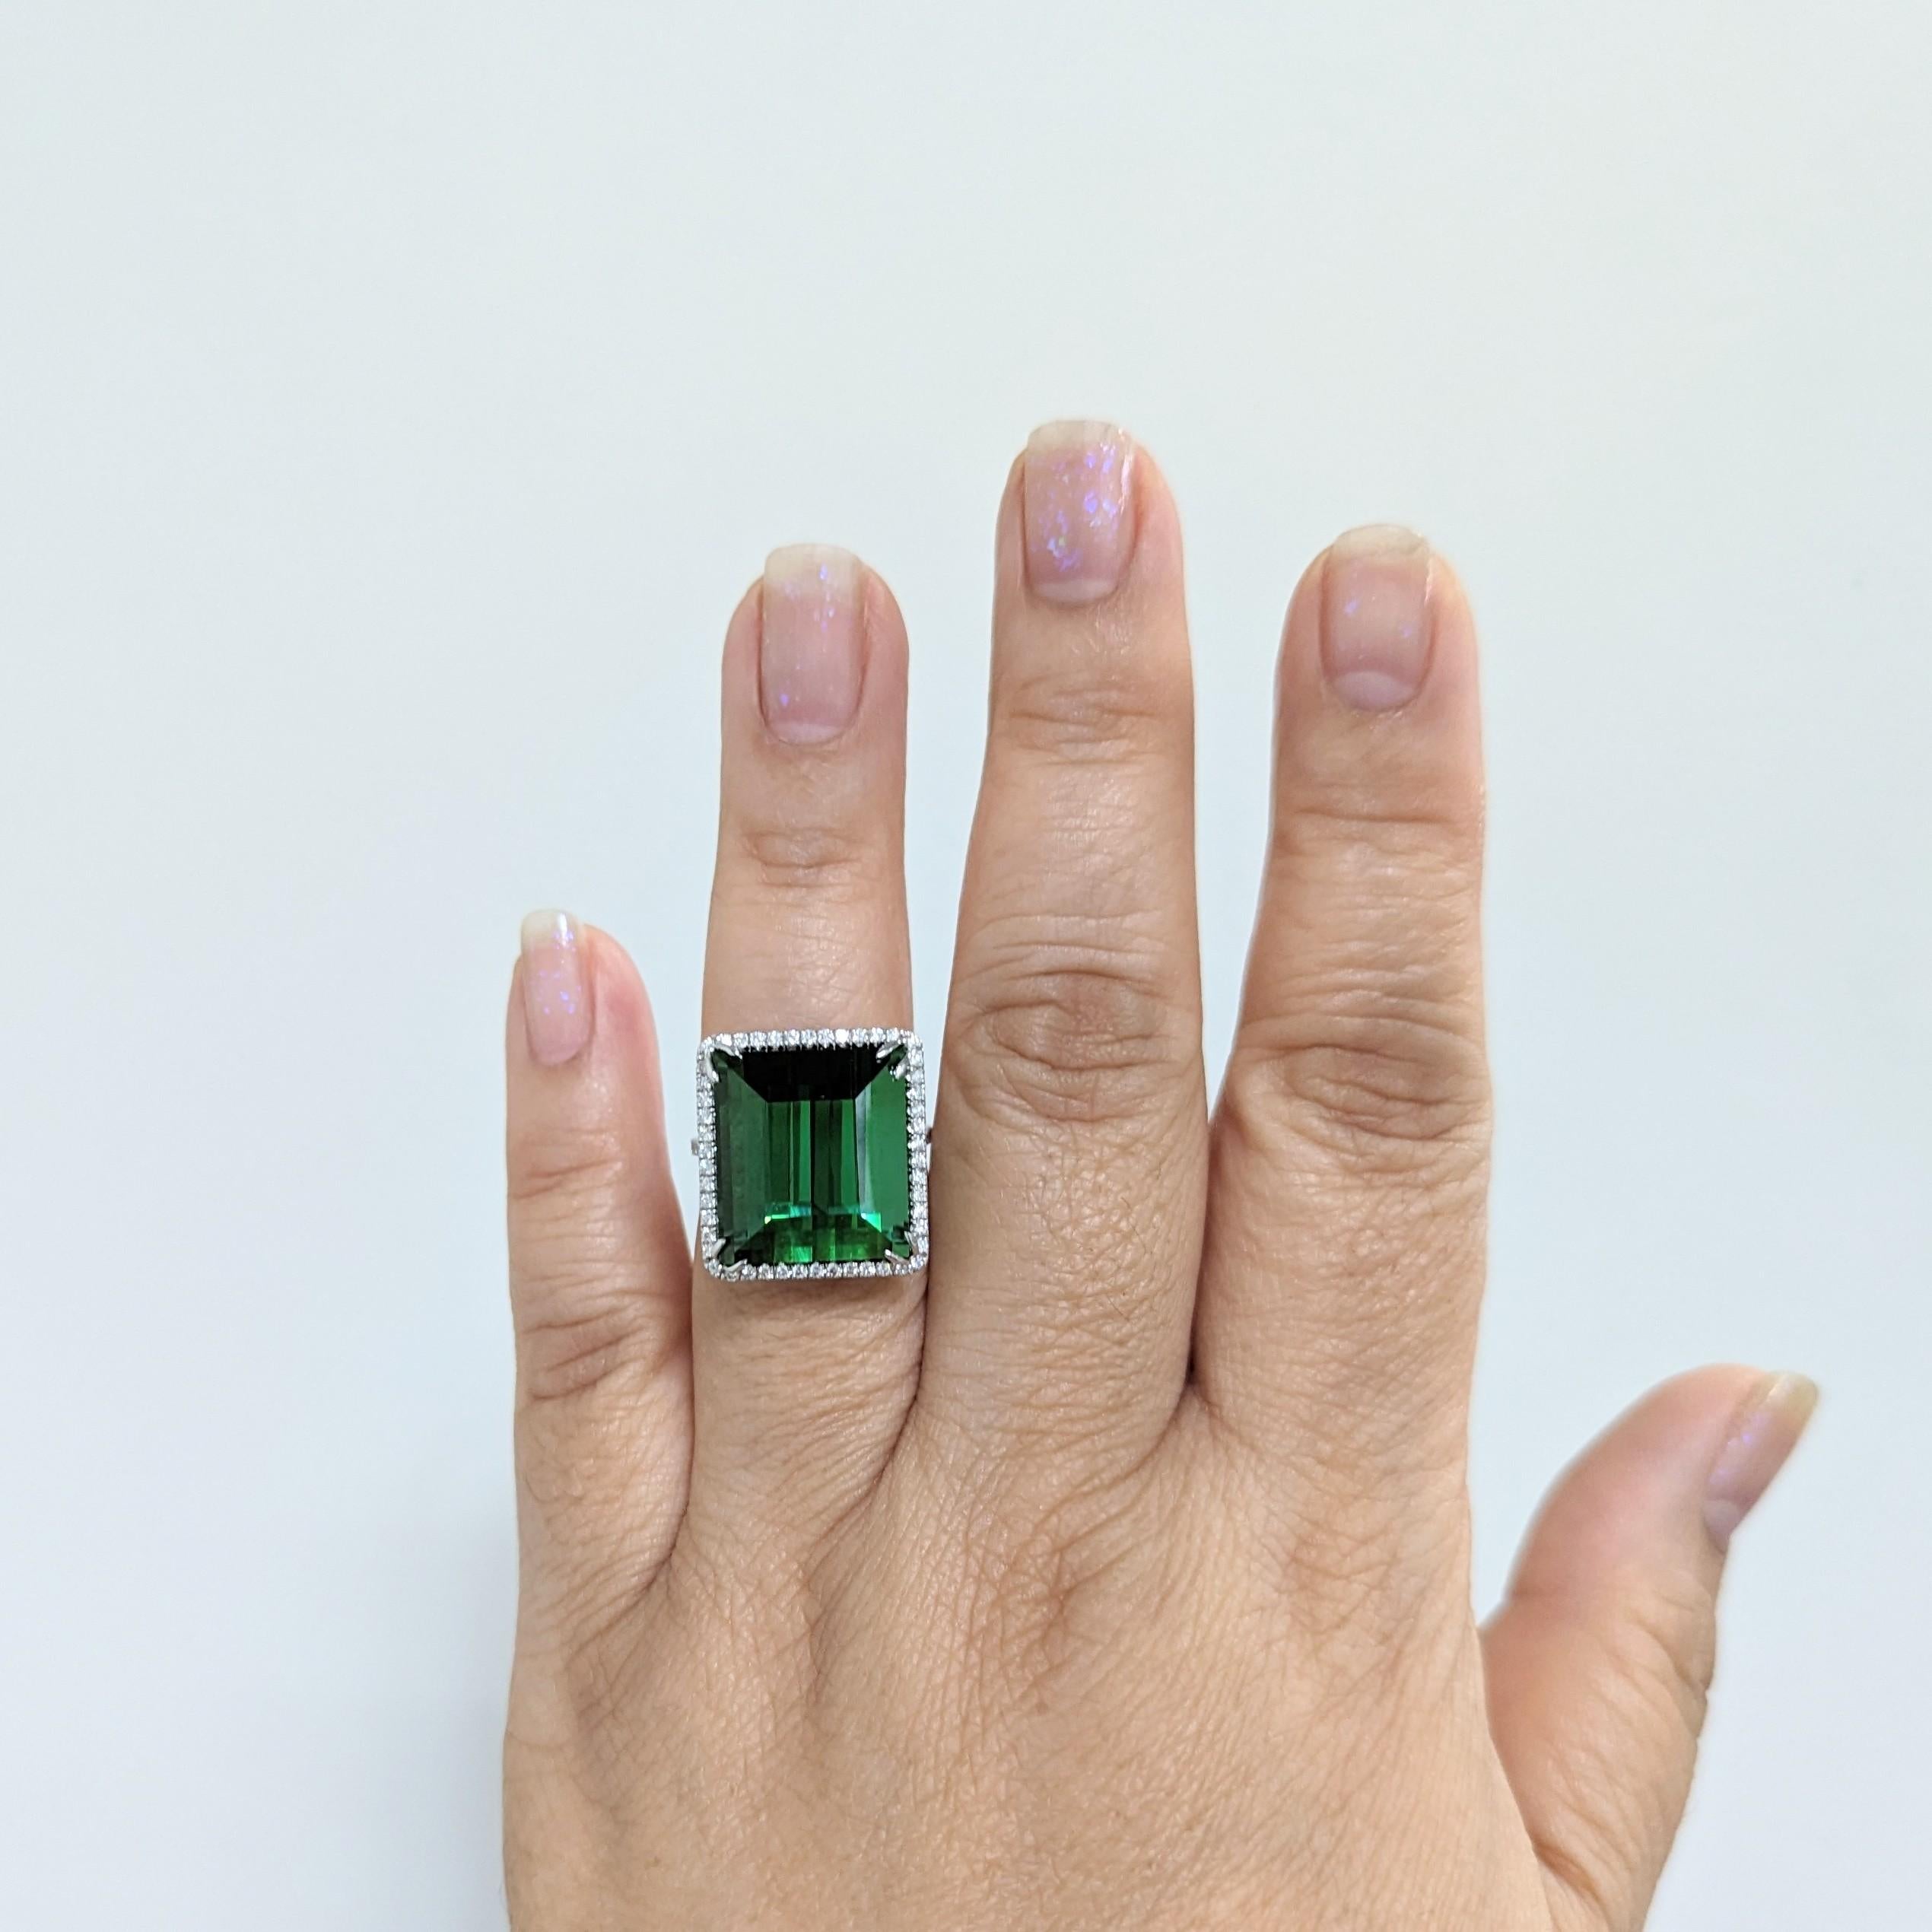 Gorgeous 23.33 ct. green tourmaline emerald cut with 0.48 ct. white diamond rounds.  Handmade in 18k white gold.  Ring size 7.